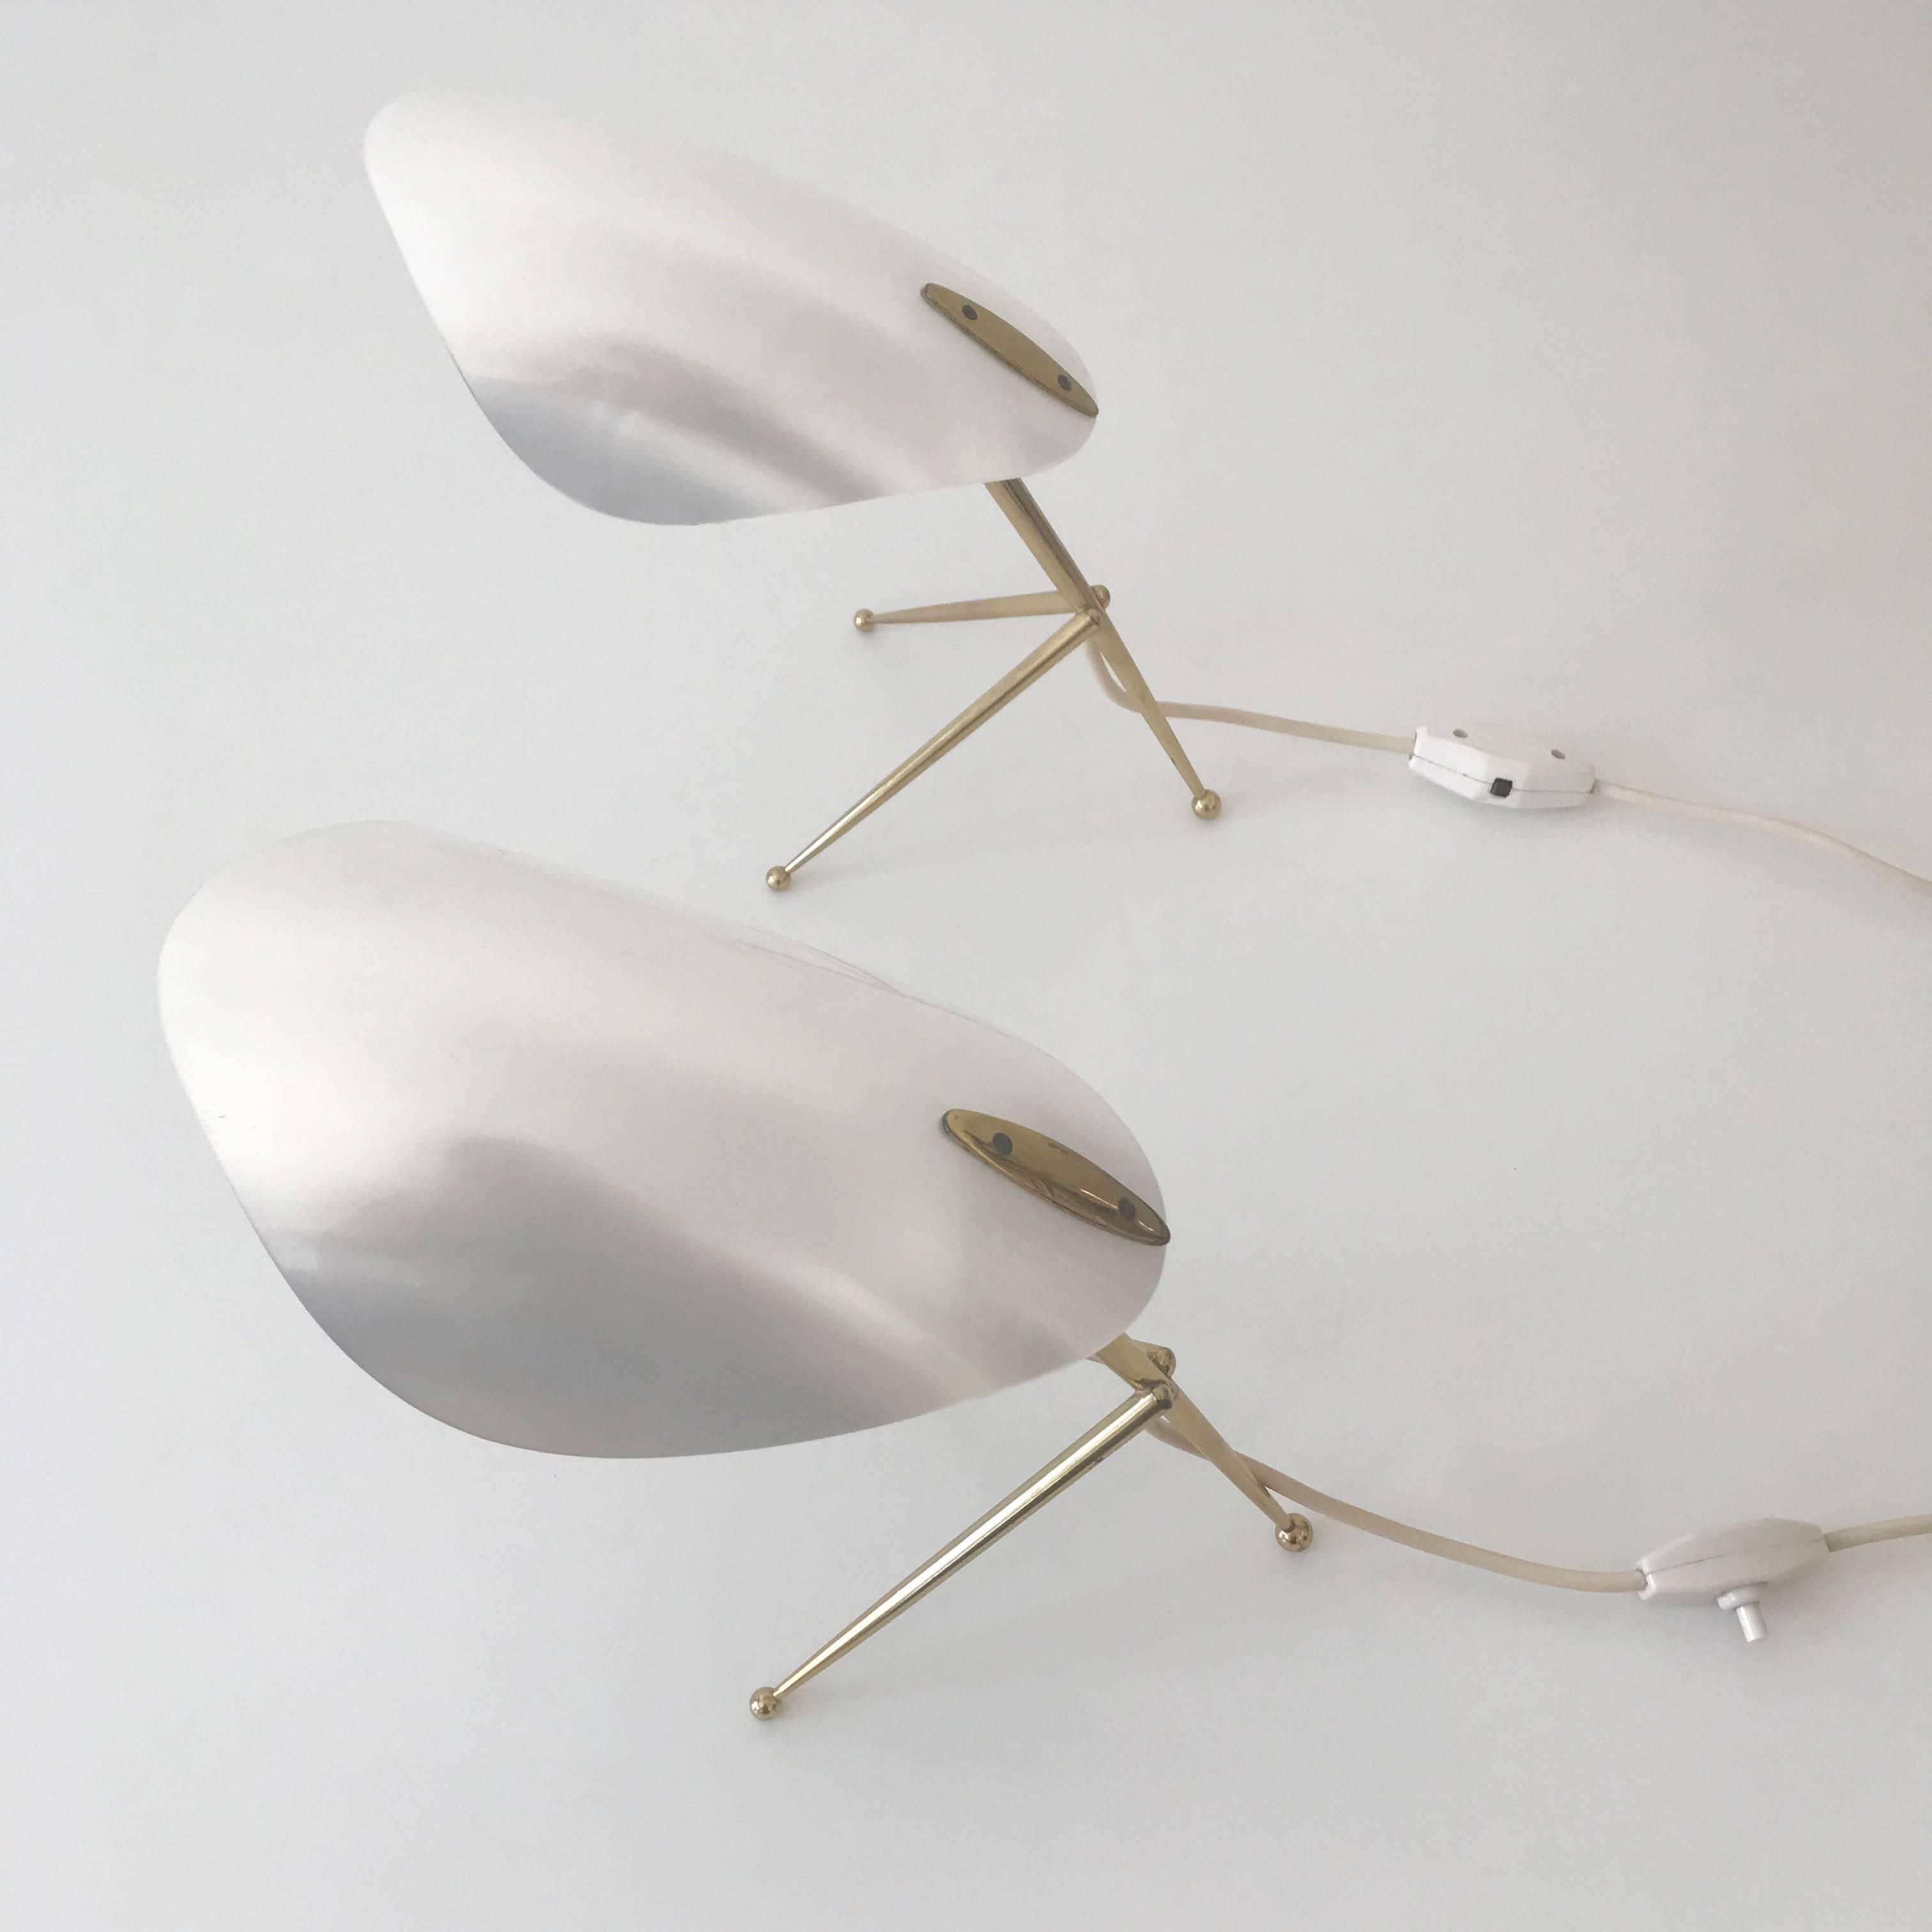 Two stunning Mid-Century Modern Sputnik table lamps. Manufactured probably by Kaiser Leuchten, Germany, 1950s.
These identical pair of table lamps are executed with tripod bases in brass and white Lucite shades which look like a mother-of-pearl.